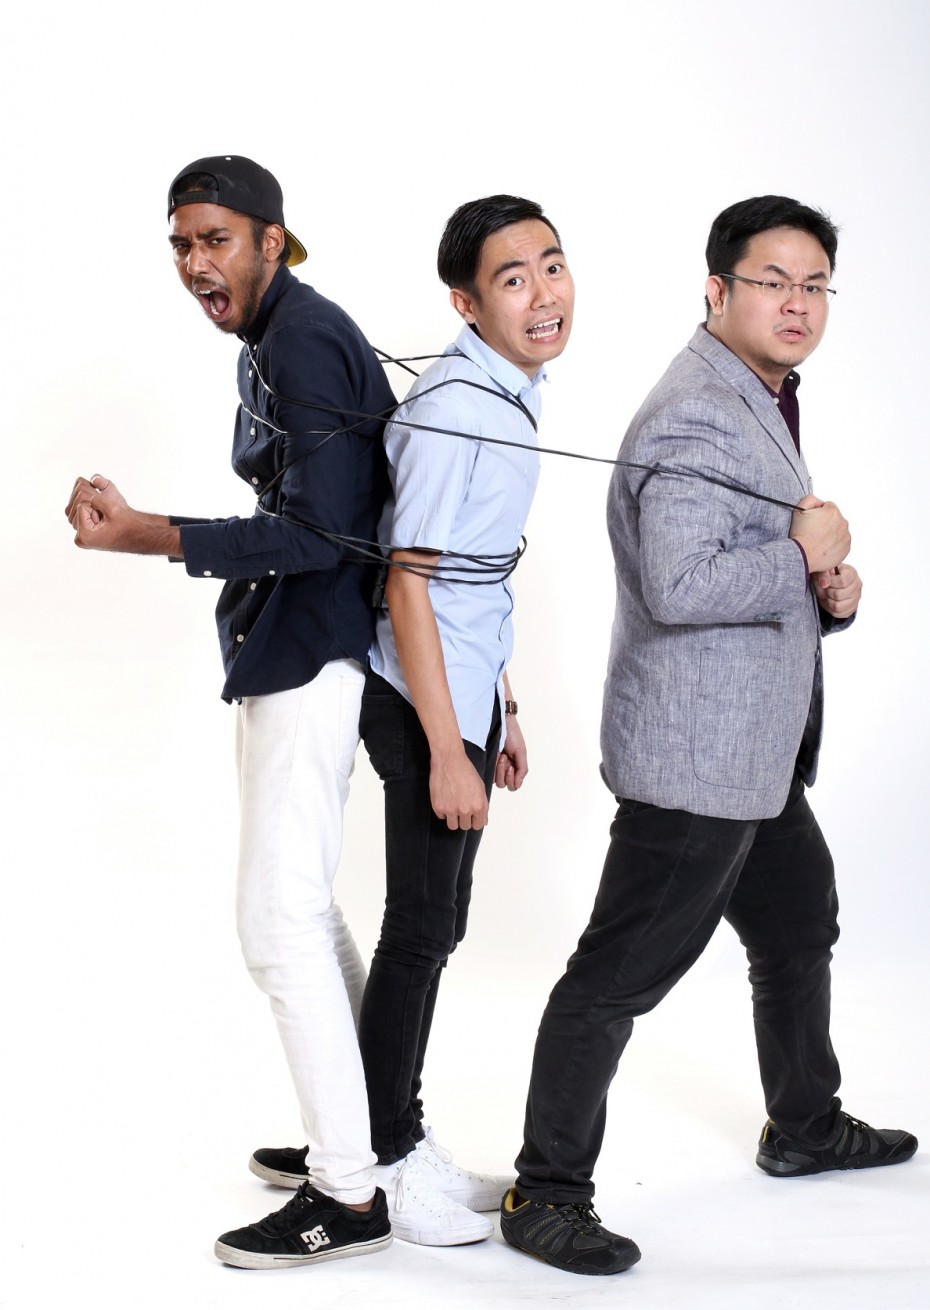 Leong (right) roped in a number of local comedians, including Thenesh (left) and Aw (middle) for the Comedians of the Colleges tour. - RAYMOND OOI/ The Star